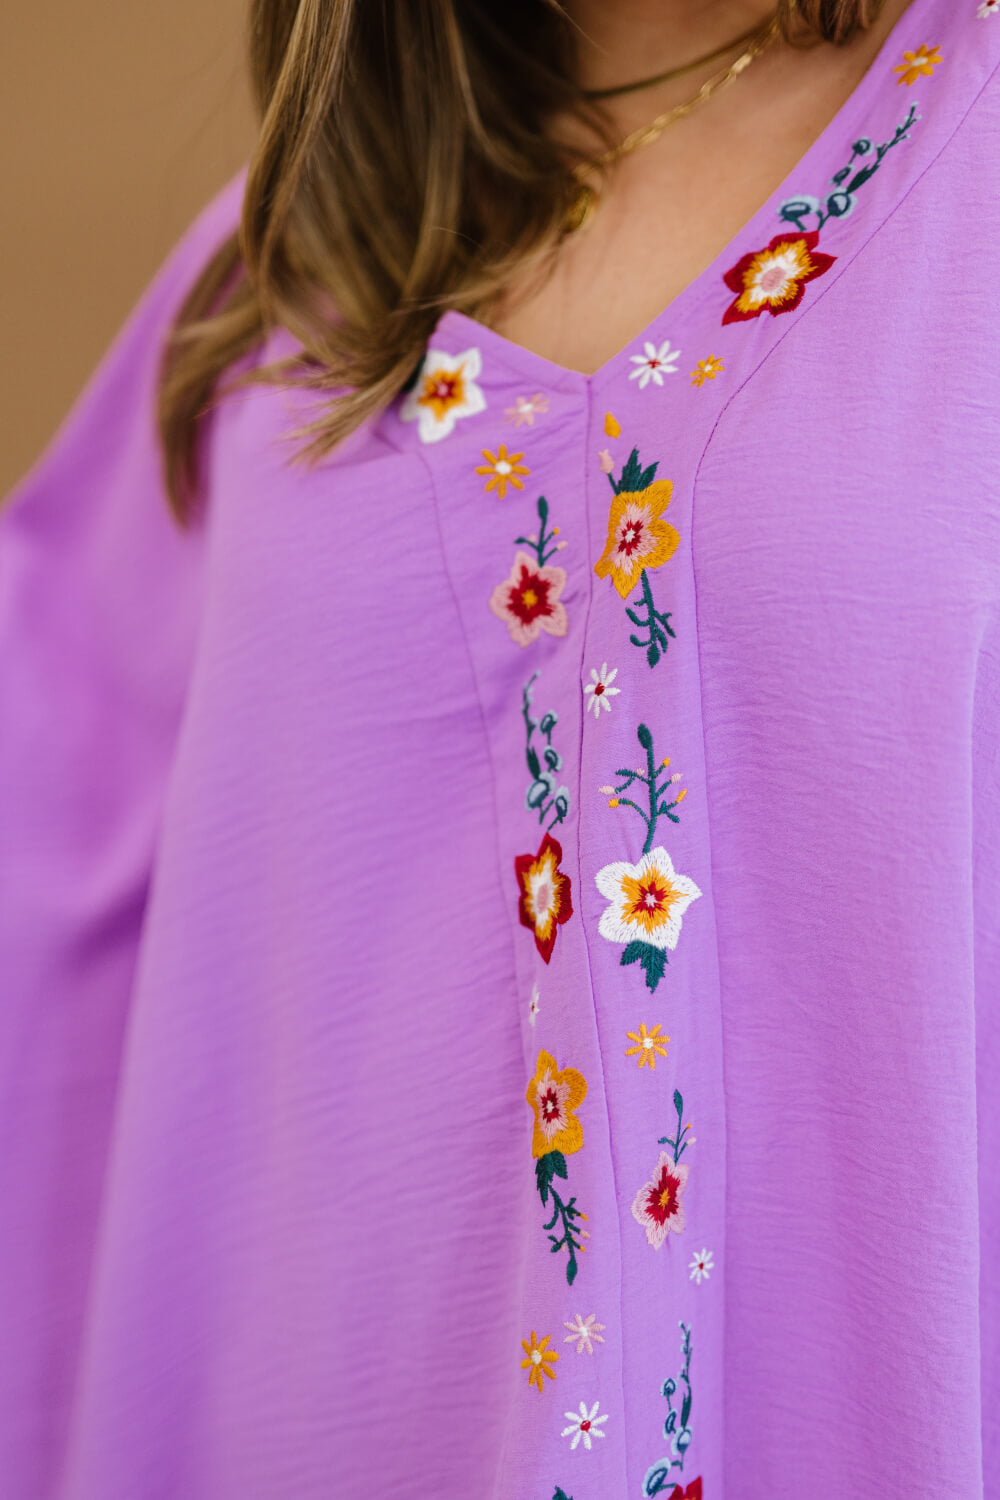 Wanderer Full Size Run Embroidered Poncho Top